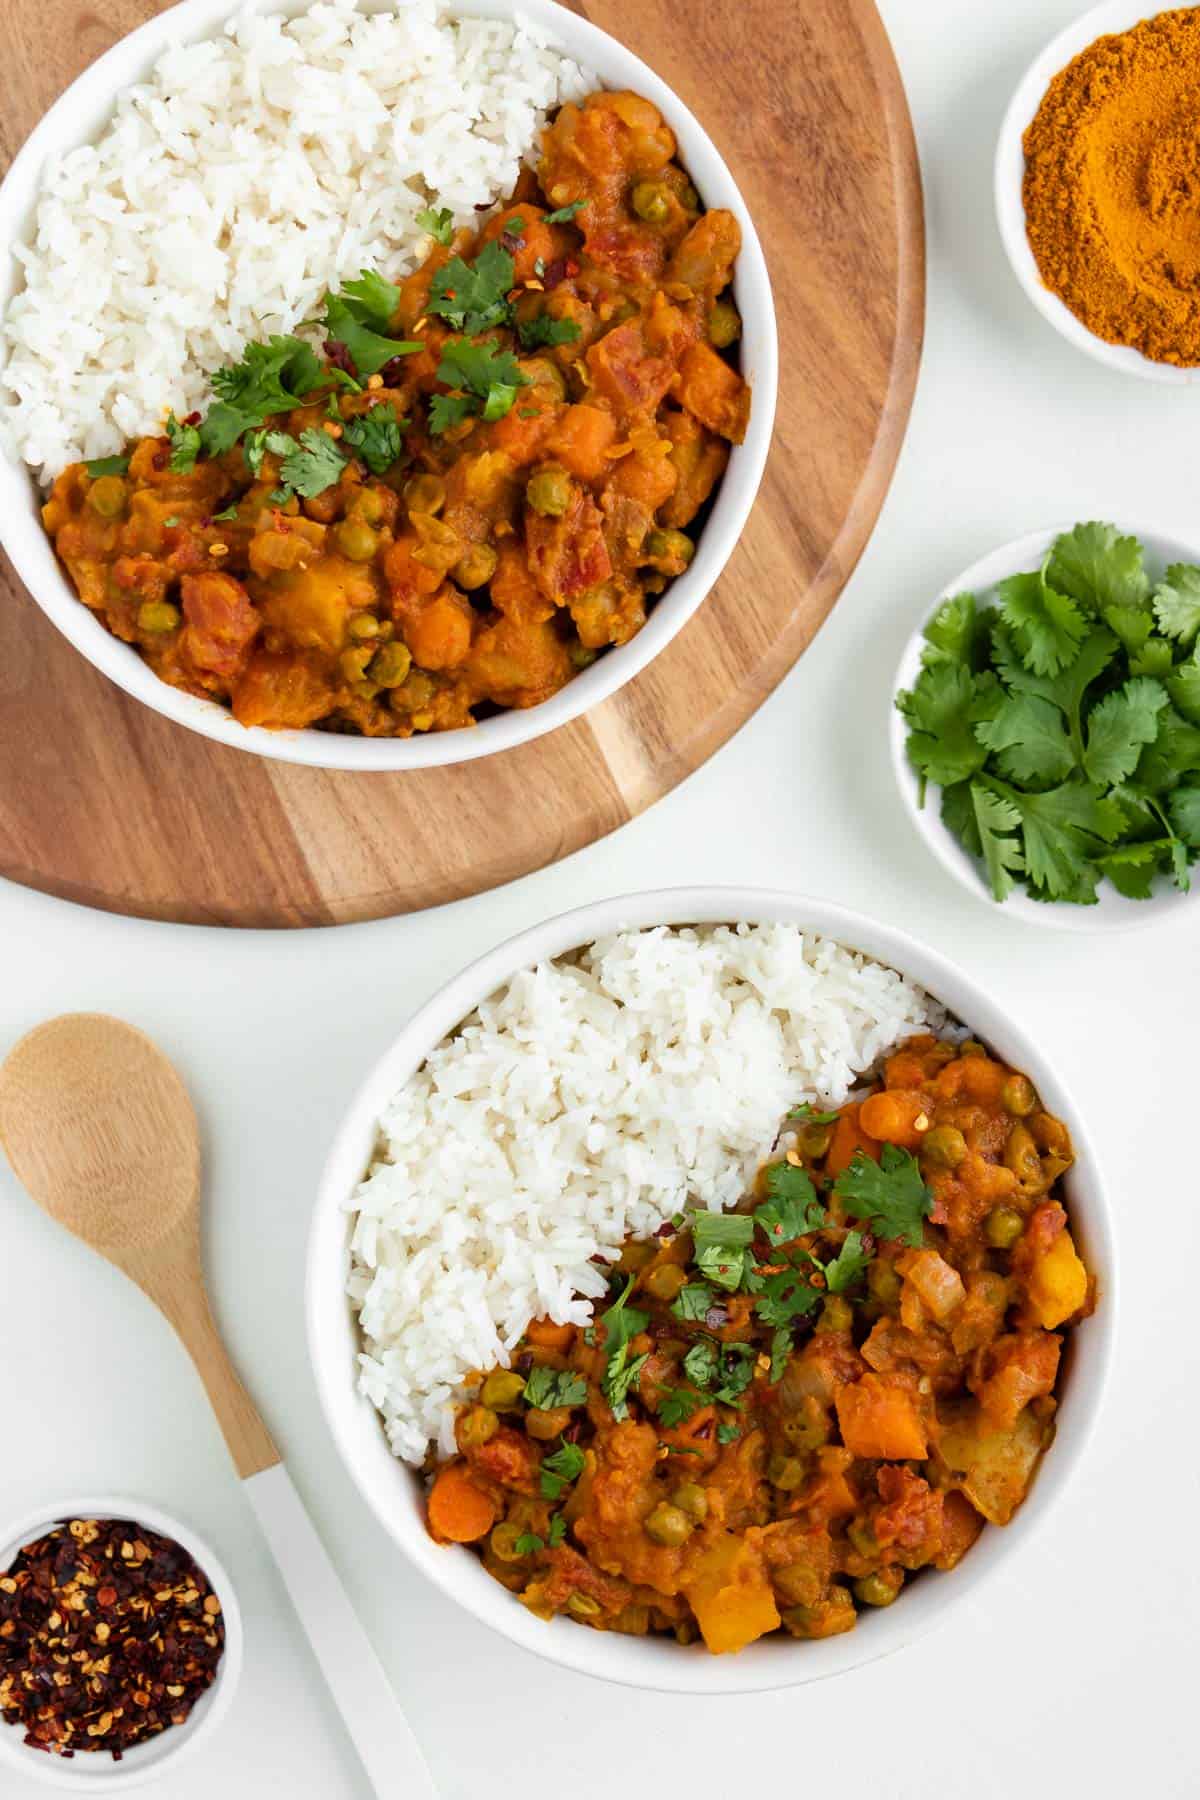 two bowls of vegan potato curry with rice beside a wooden spoon, bowl of red pepper flakes, and bowl of cilantro